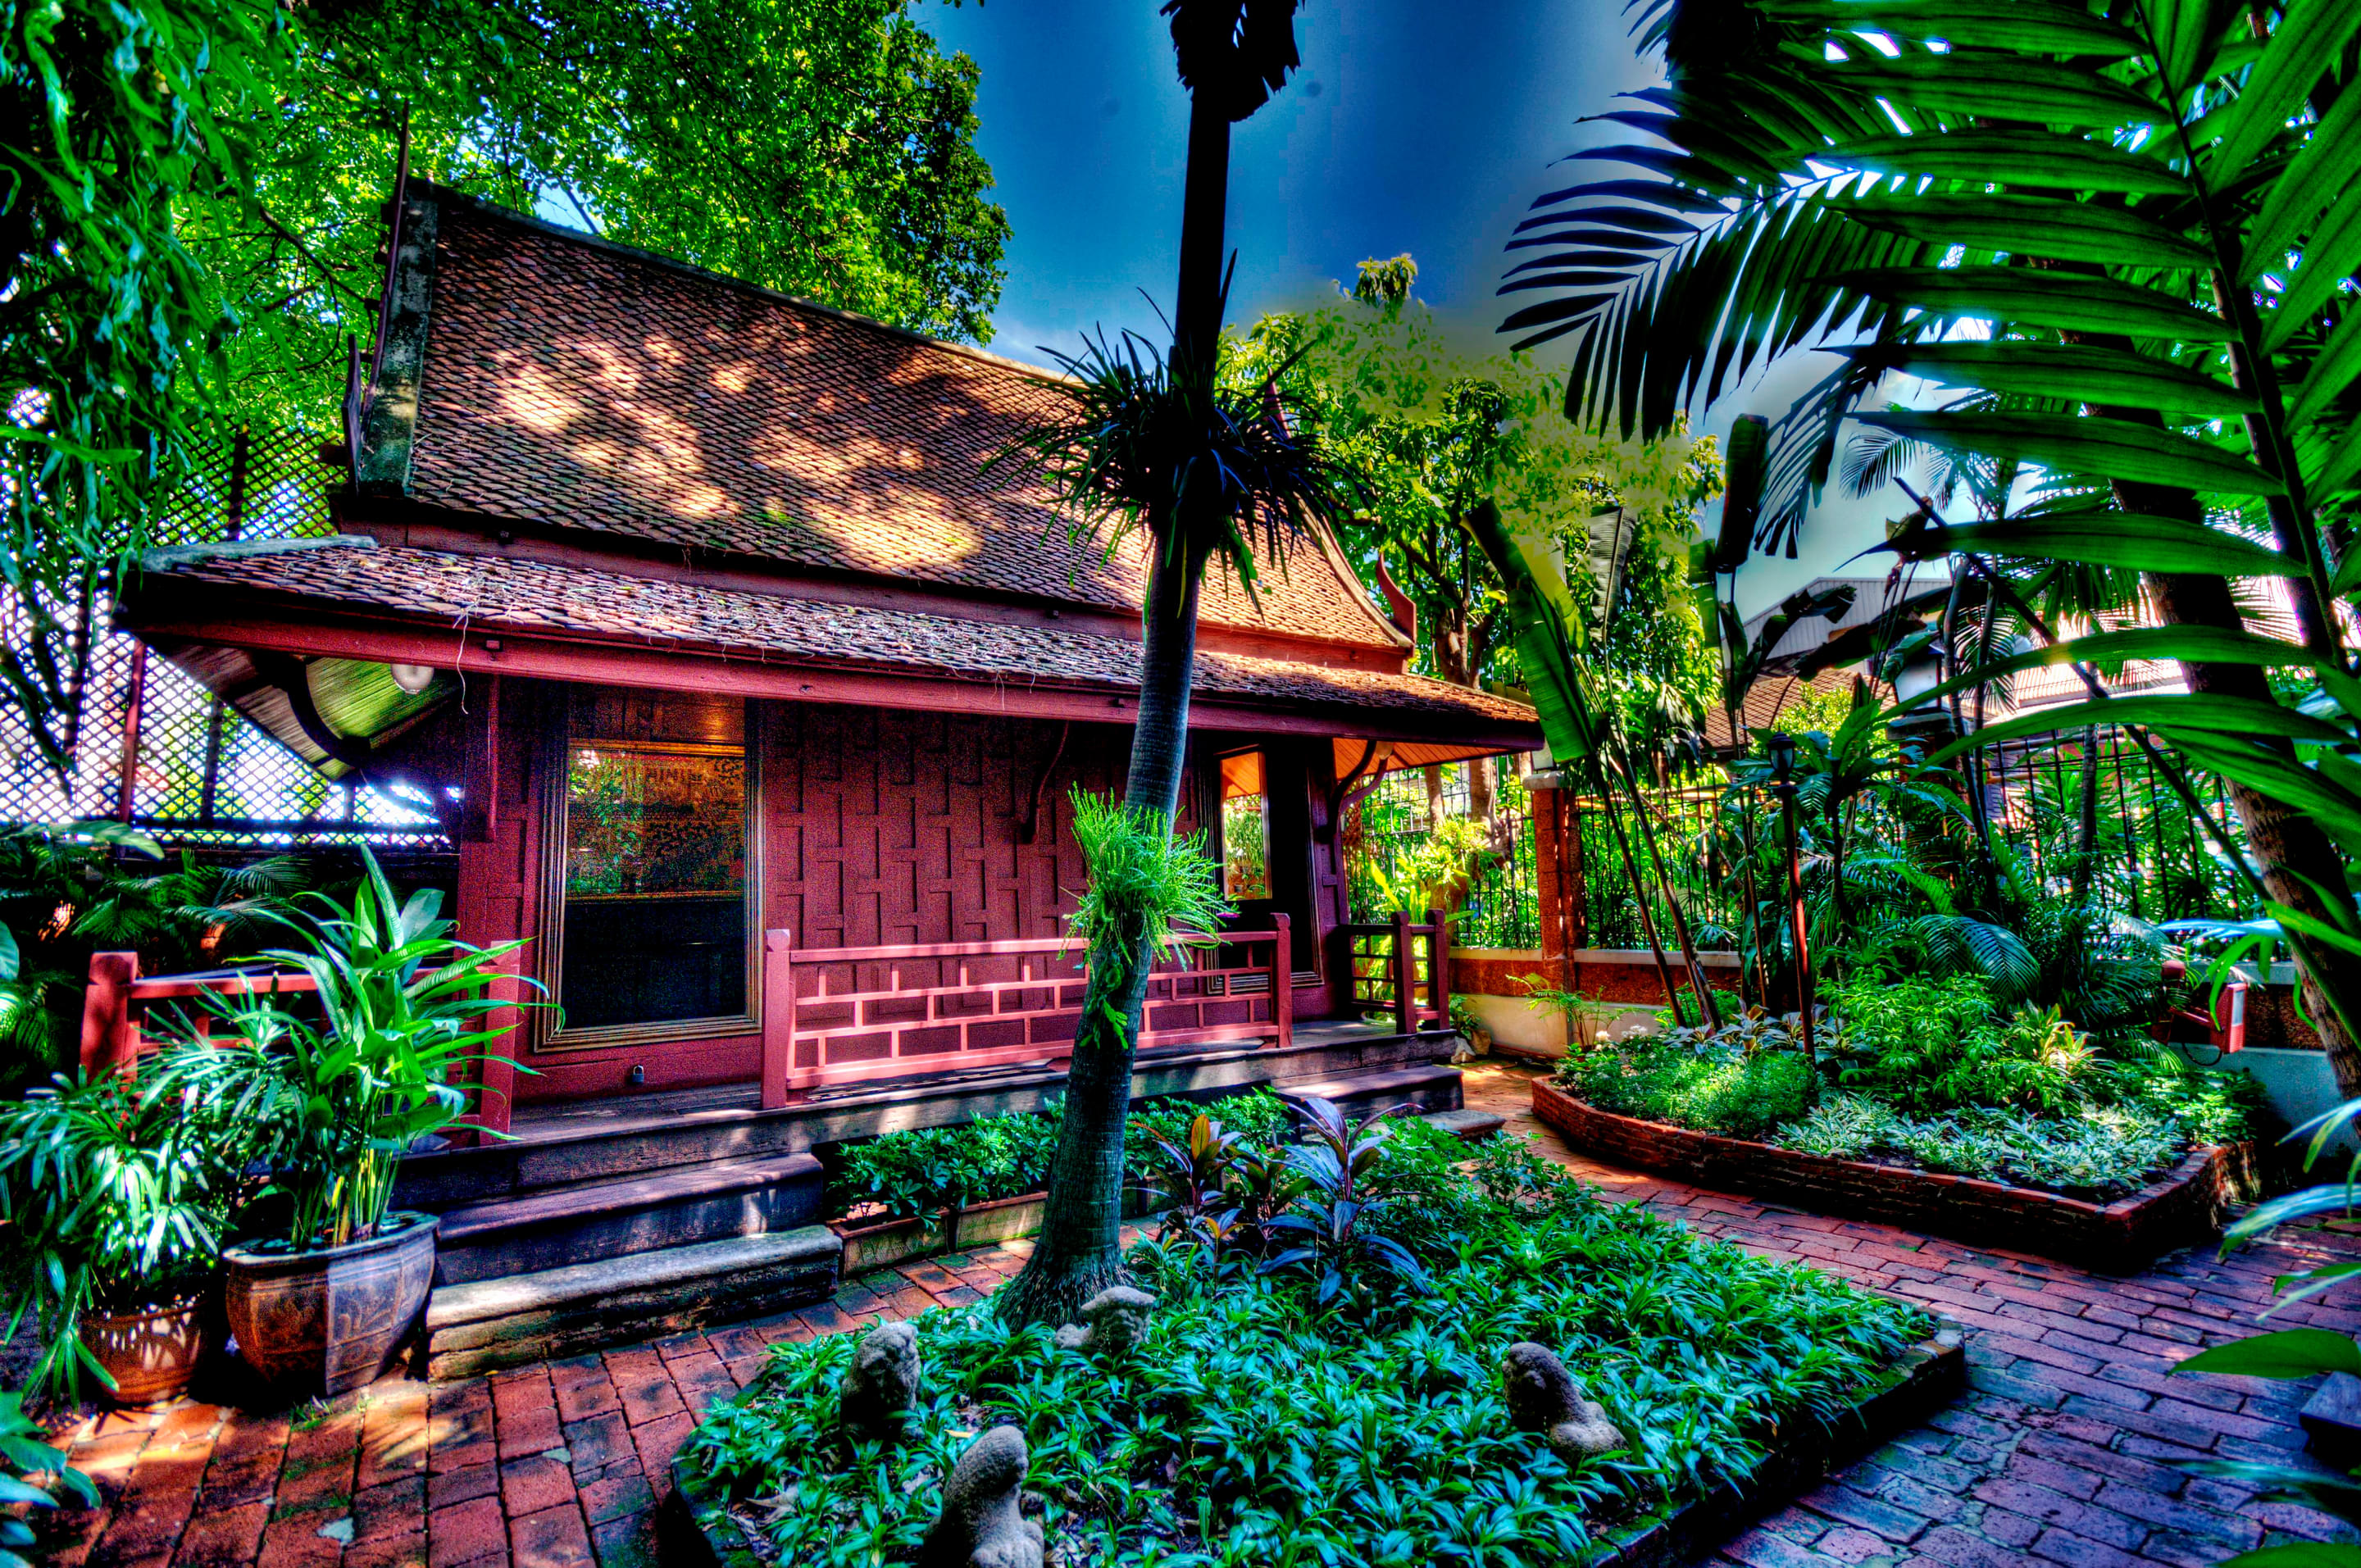 The Jim Thompson House Overview